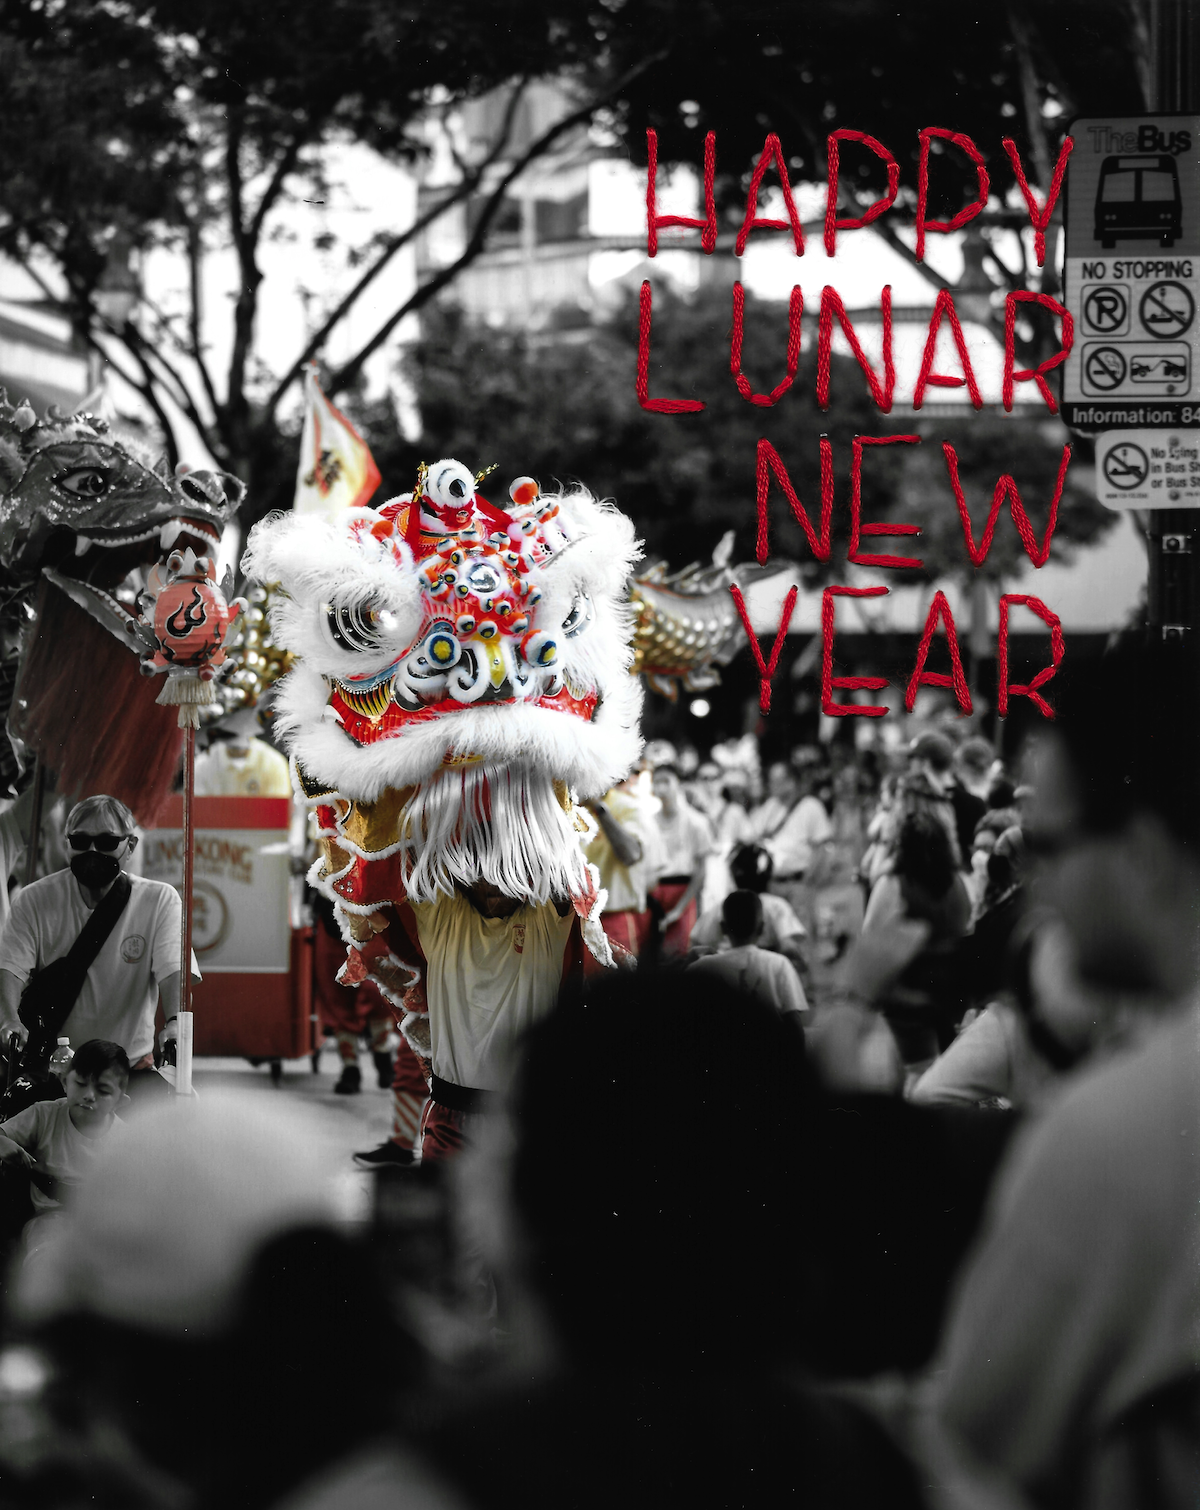 Photo of dragon dancer at the Lunar New Year celebration in Honolulu. The words Happy Lunar New Year are embroidered in thread on the photo.